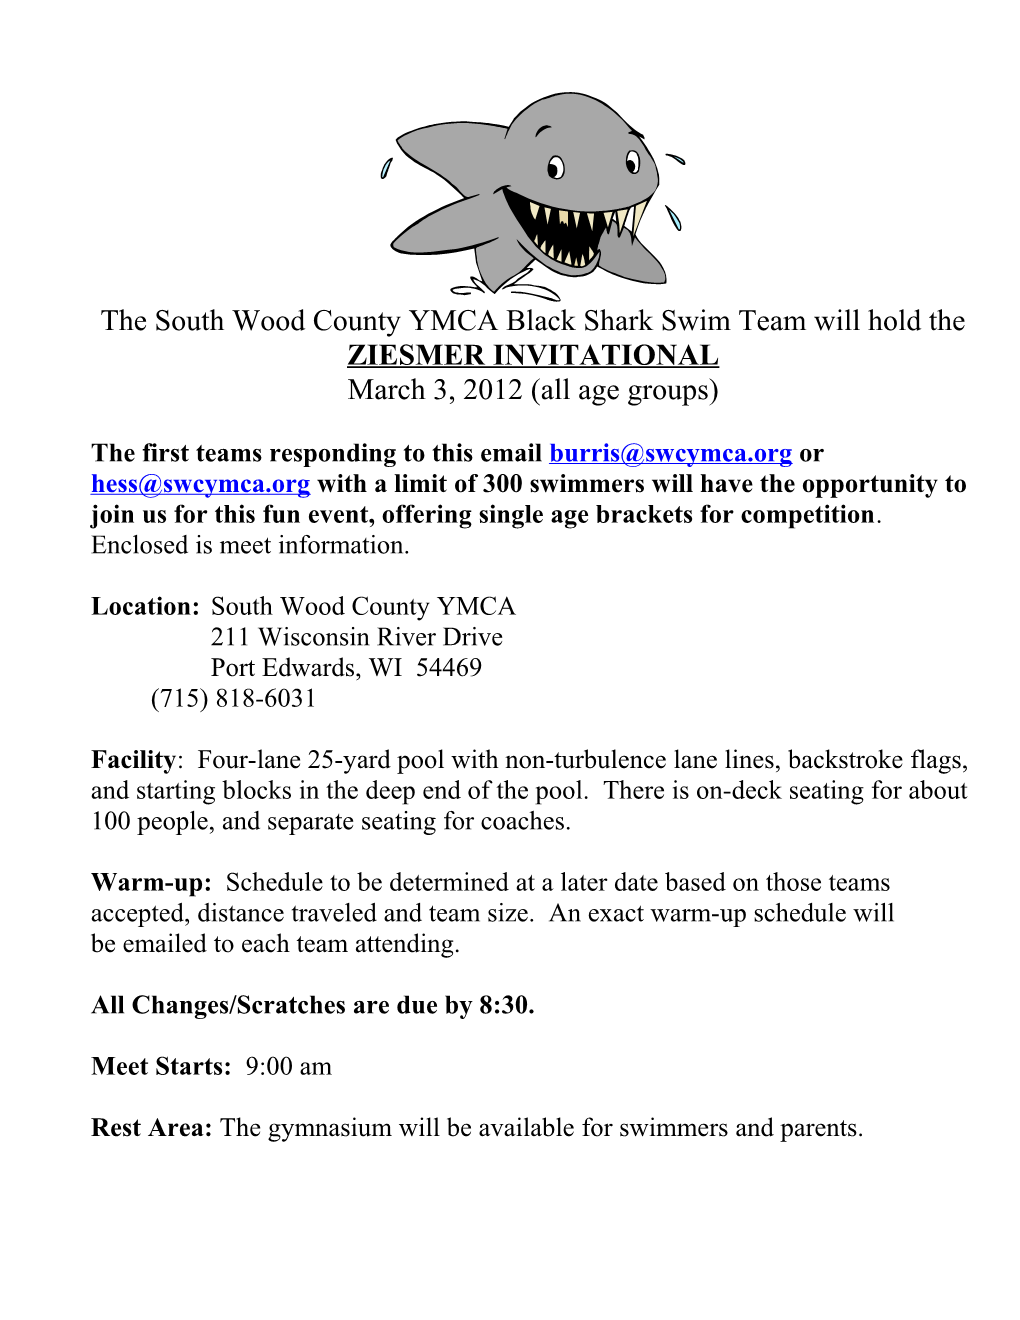 The South Wood County YMCA Tsunami Swim Team Will Hold Their Annual Barb Ziesmer 11 & Under